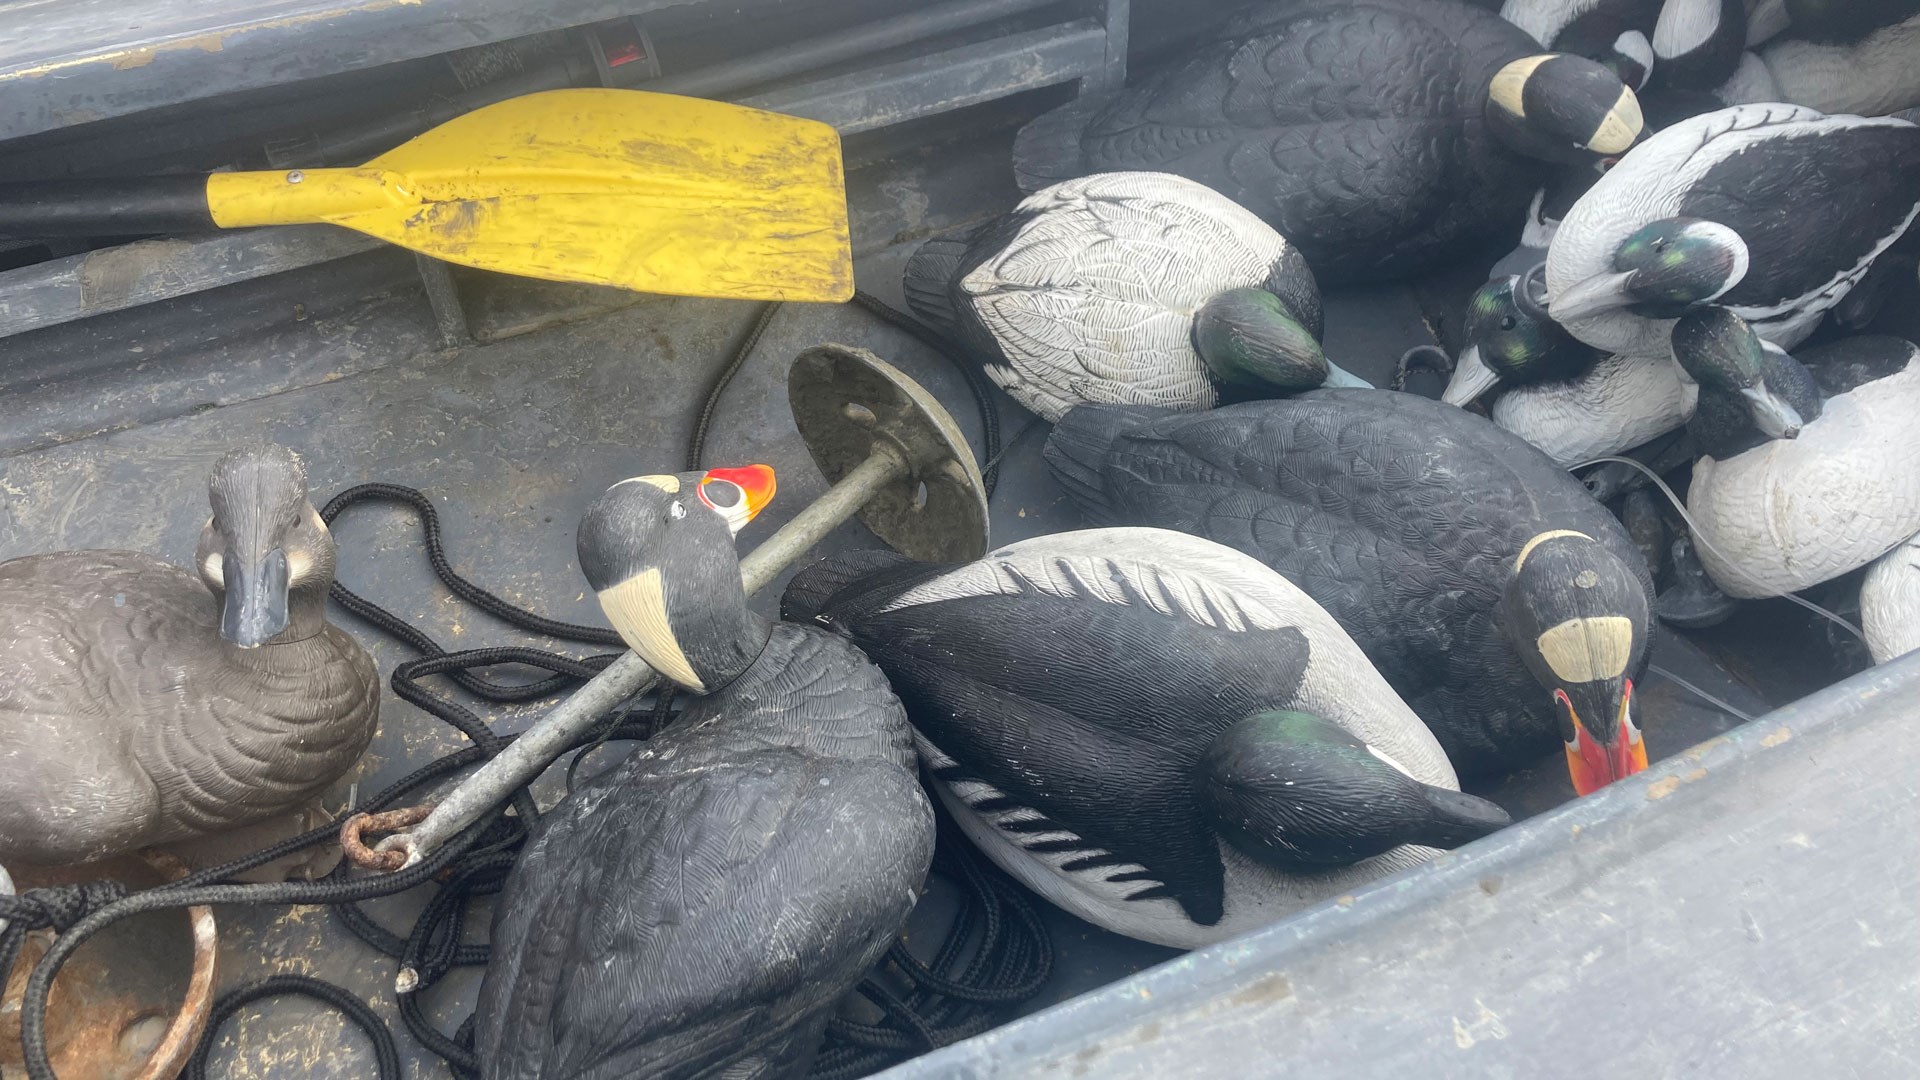 Decoys in a boat